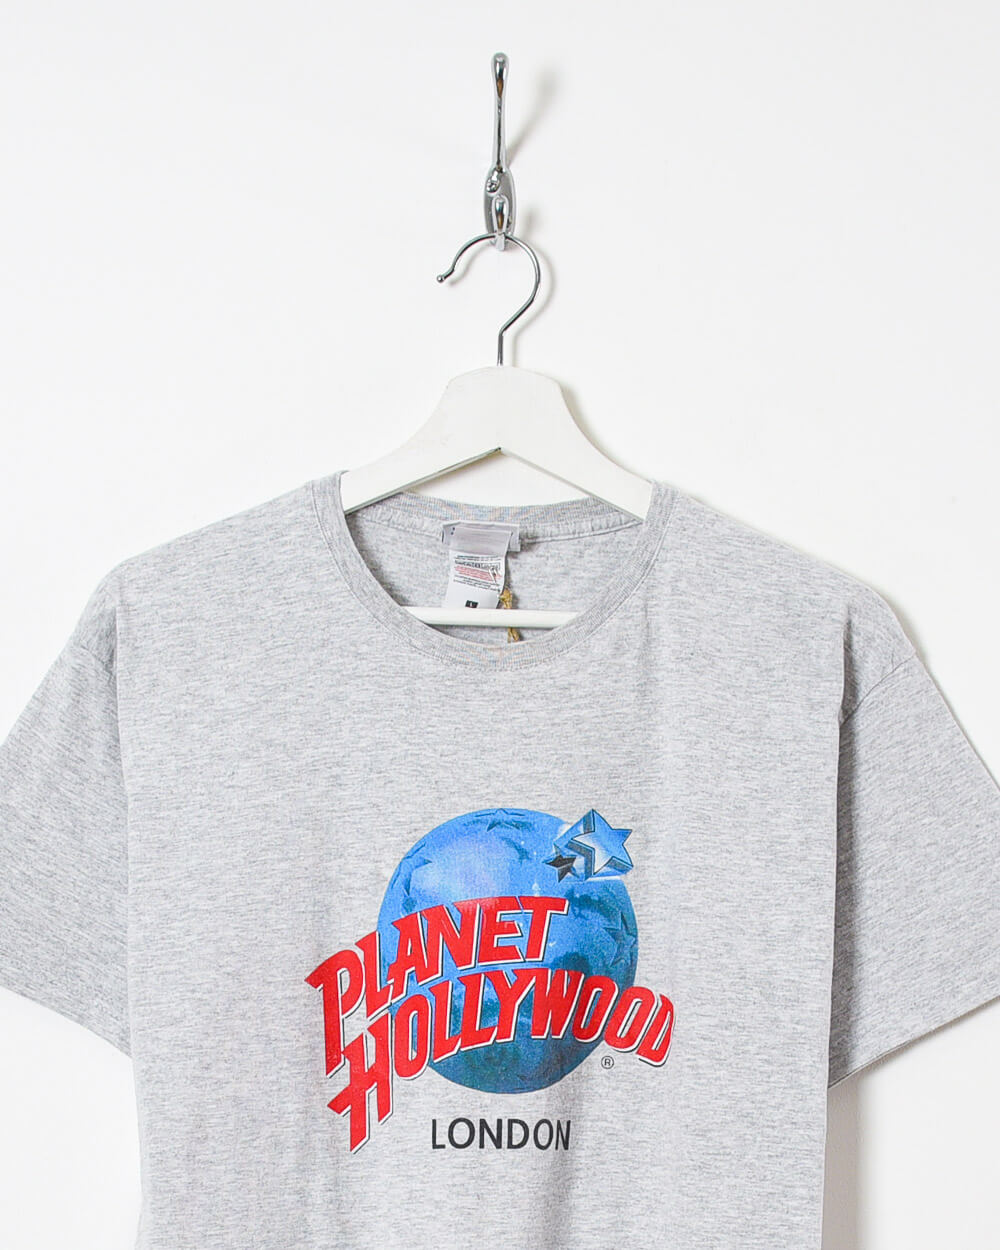 Planet Hollywood T-Shirt - Large - Domno Vintage 90s, 80s, 00s Retro and Vintage Clothing 